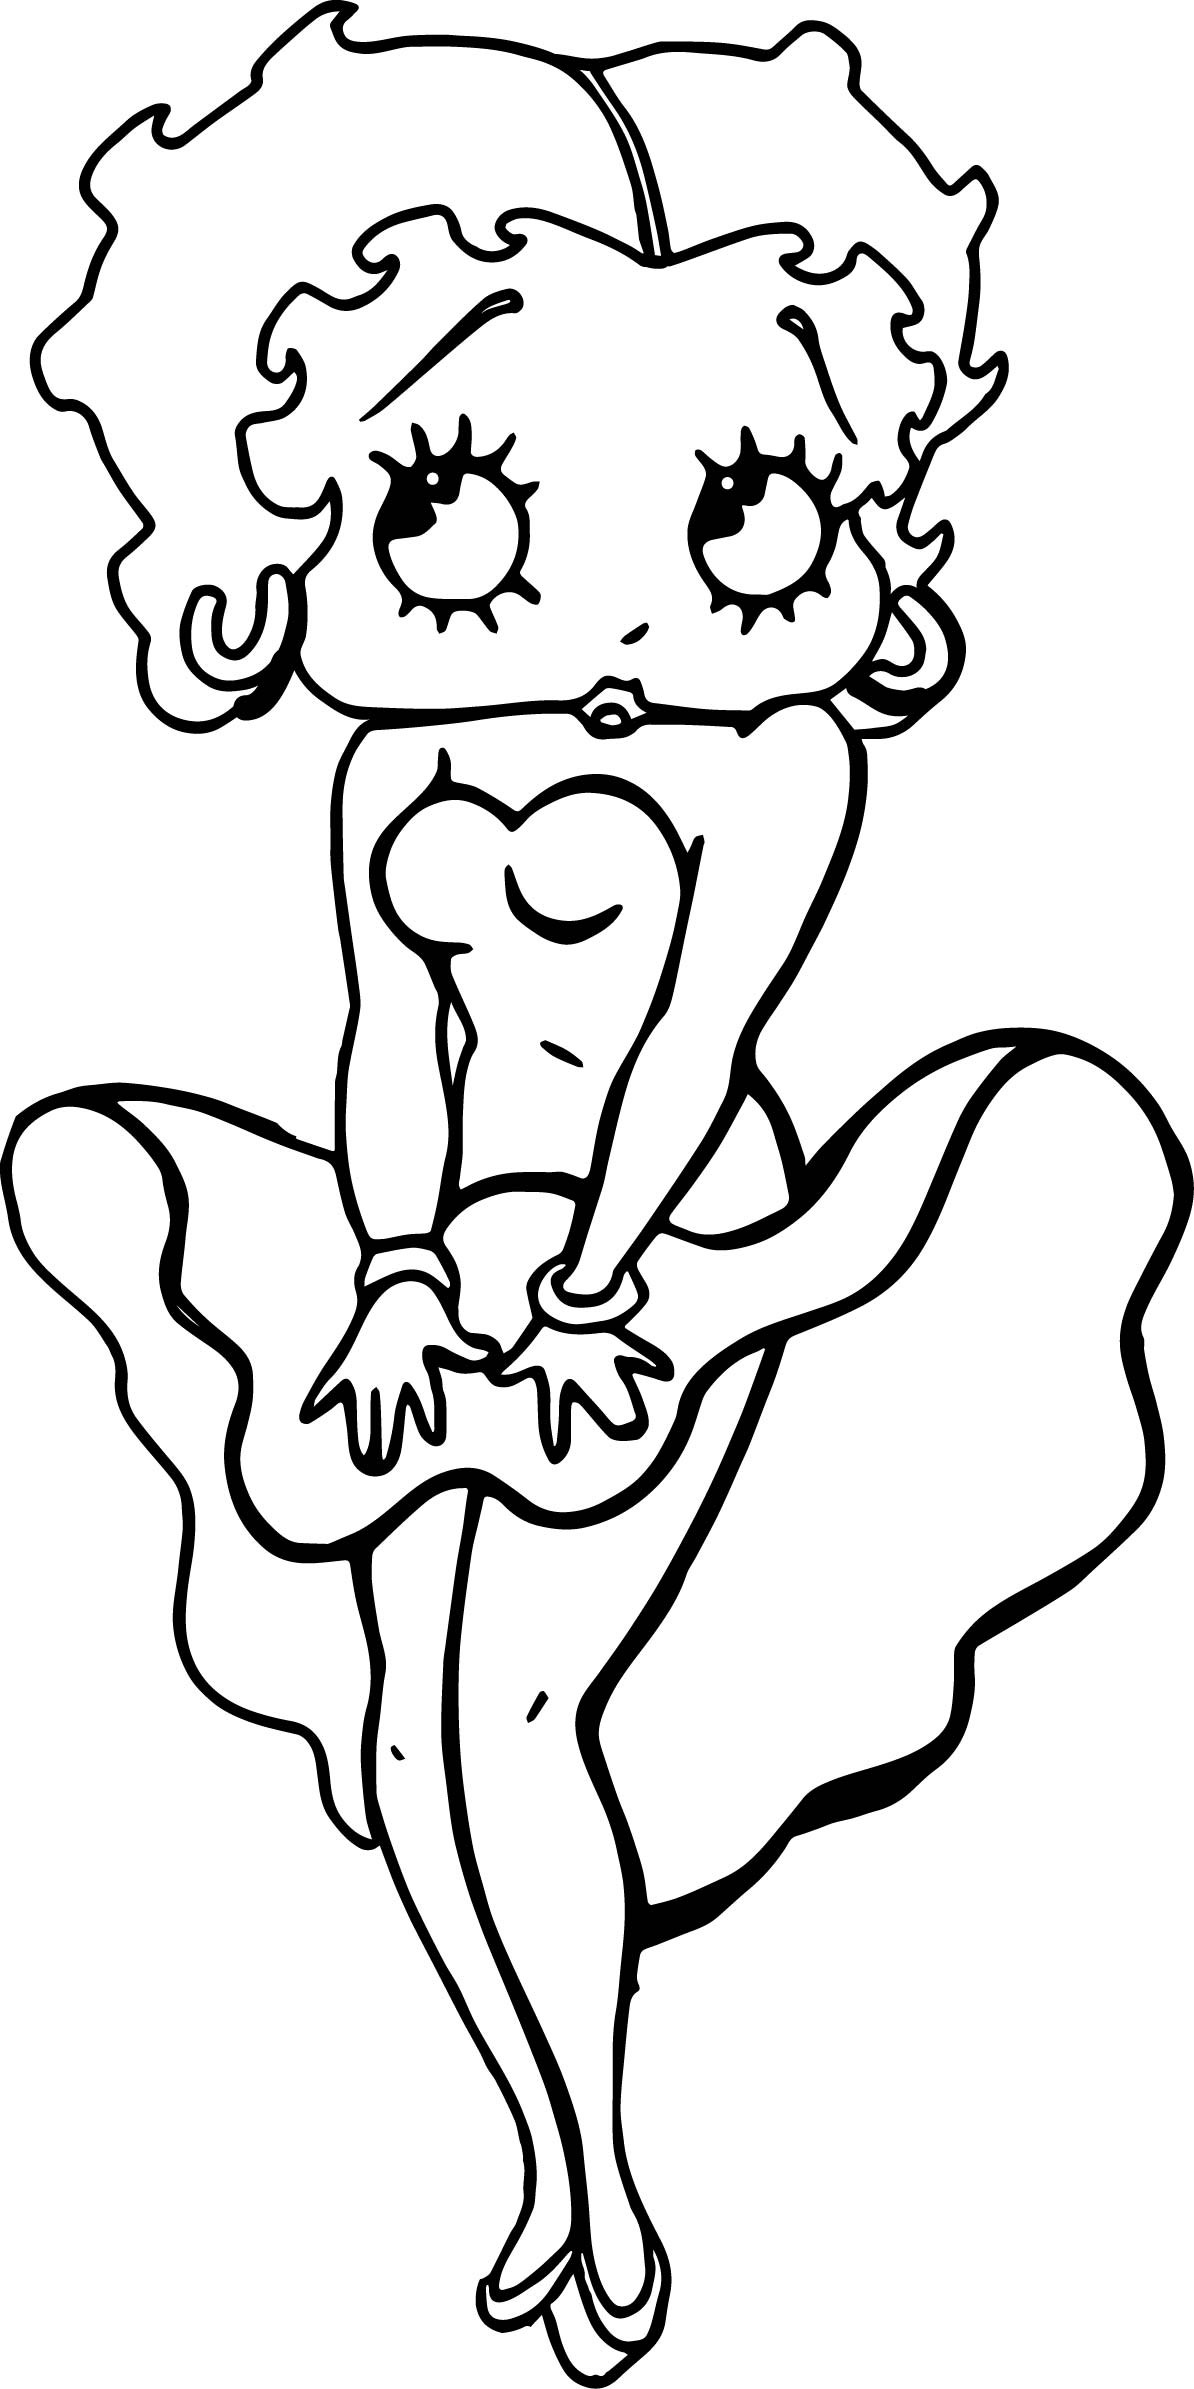 betty-boop-coloring-pages-at-getcolorings-free-printable-colorings-pages-to-print-and-color